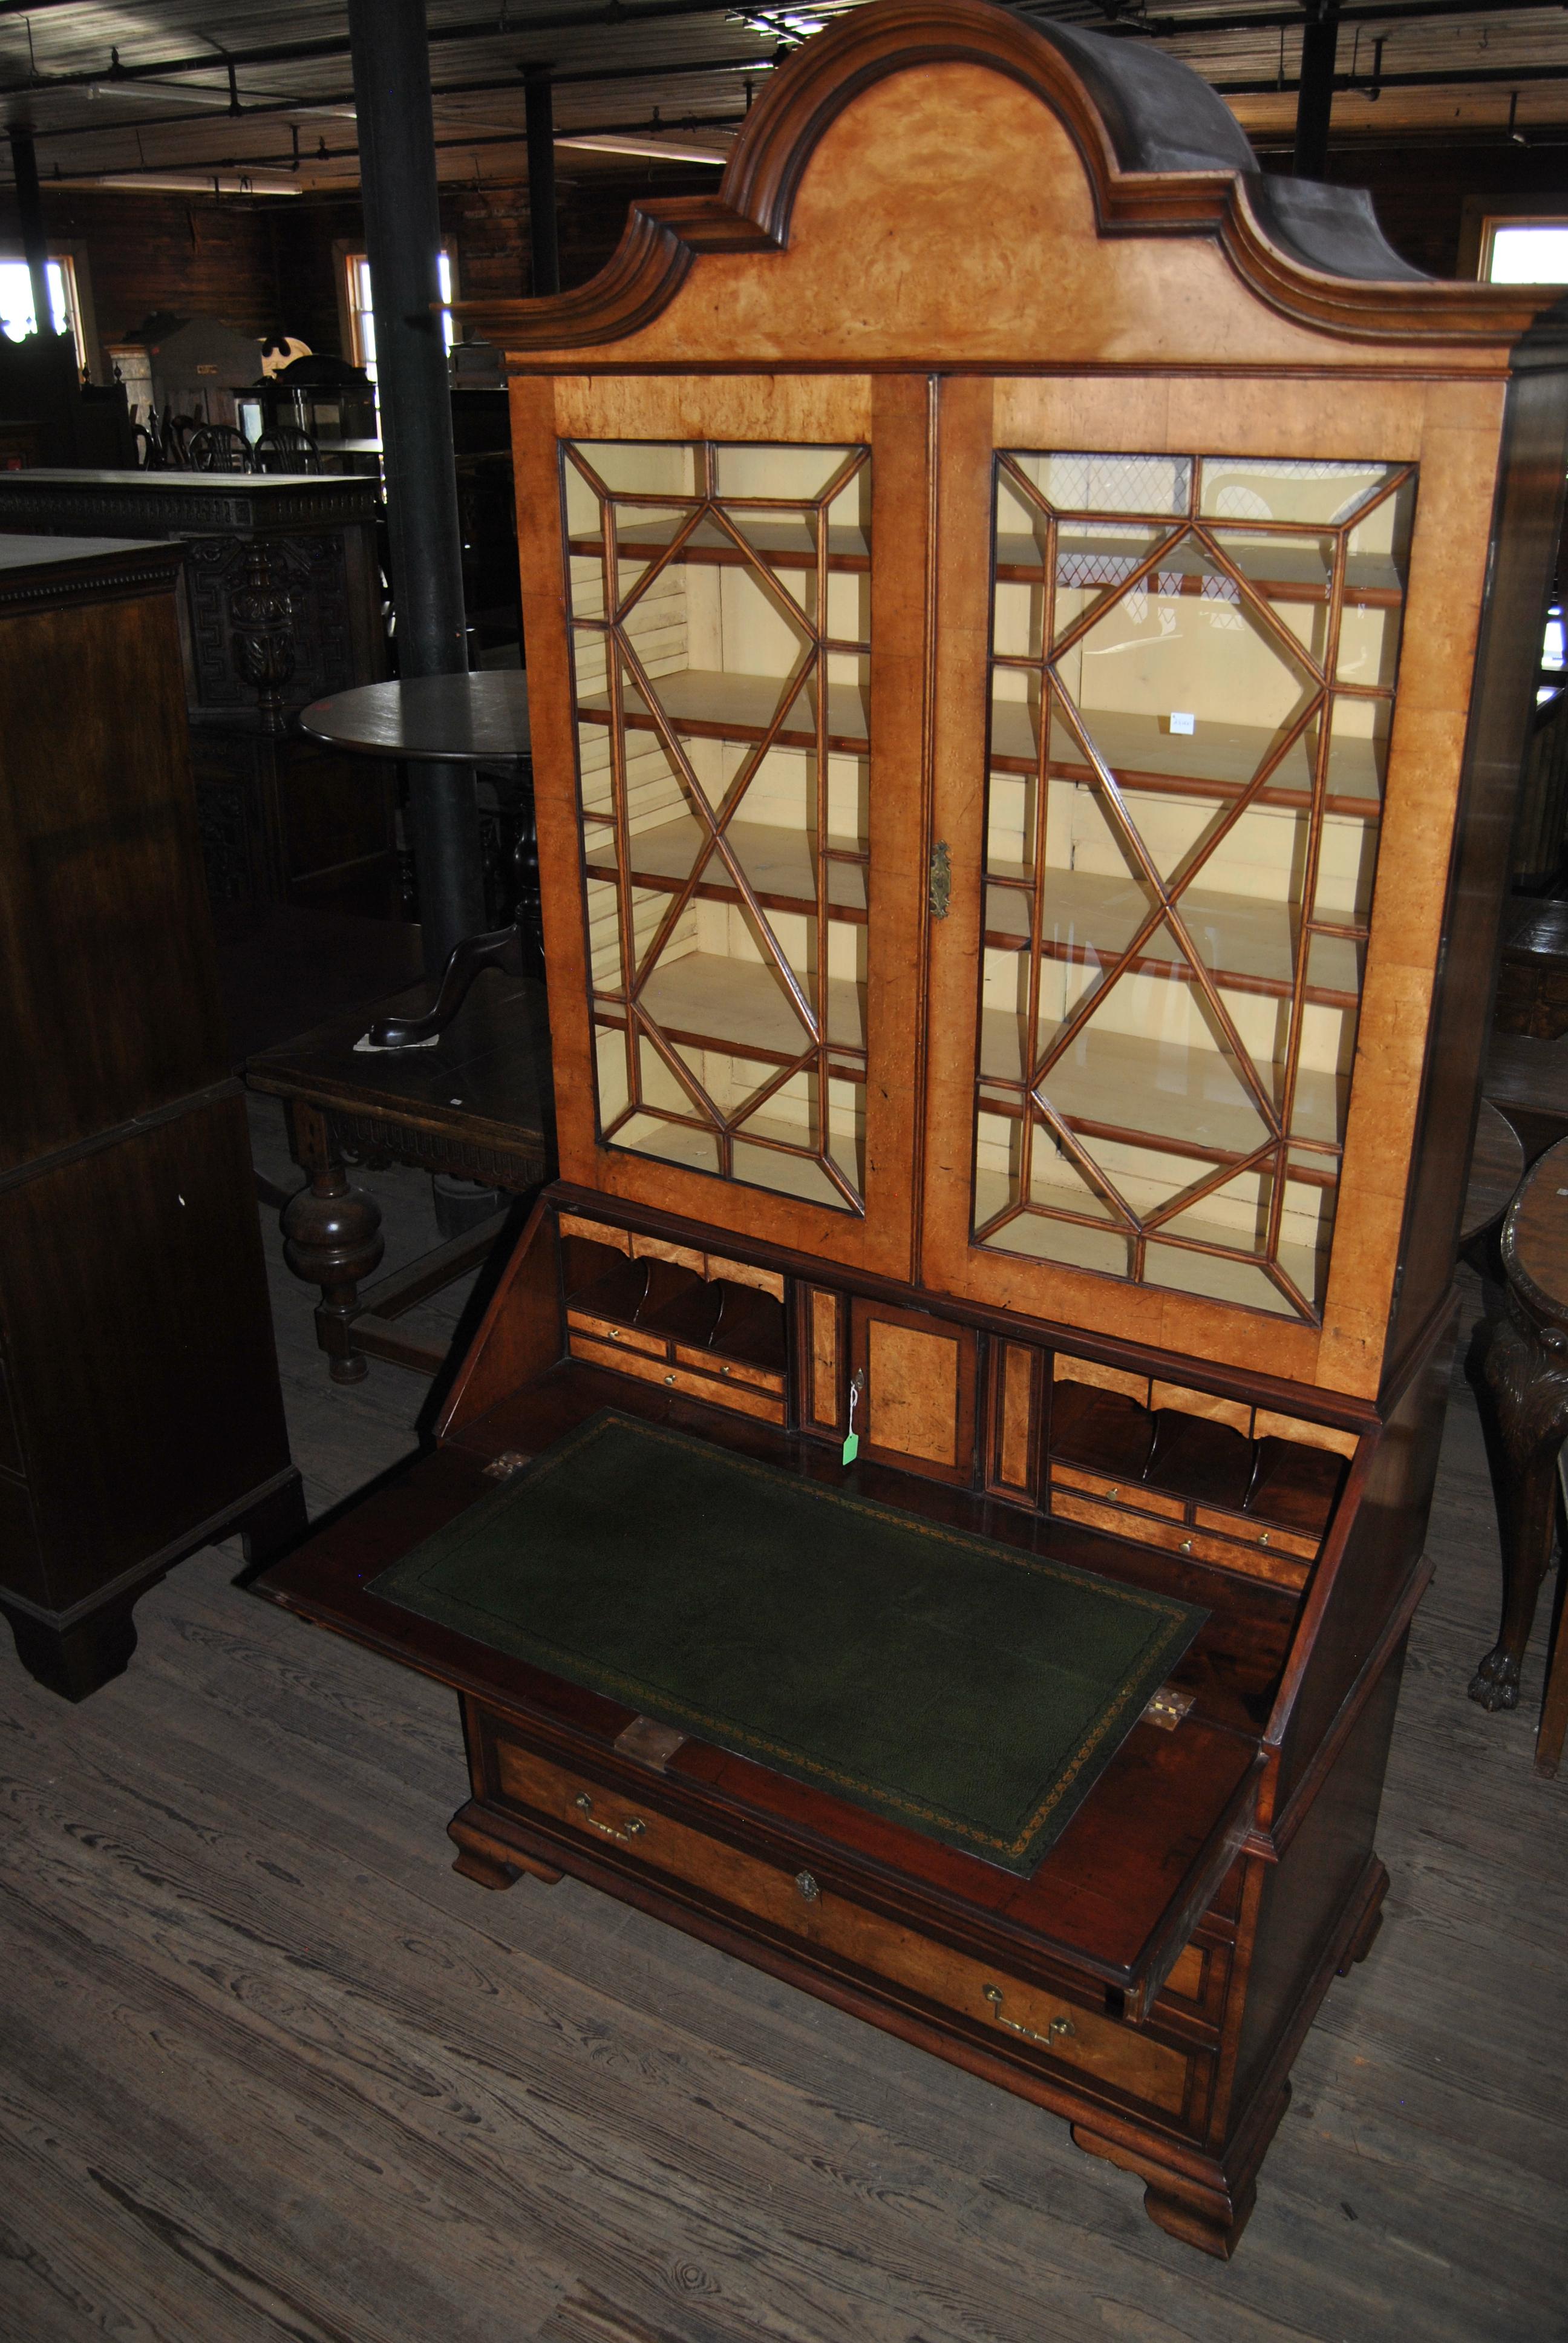 This is a bookcase secretary / bureau bookcase made in England, circa 1790. It has a beautifully shaped top with a heavy, layered crown molding. There is a pair of beautifully glazed windows in the upper doors. There are four adjustable shelves